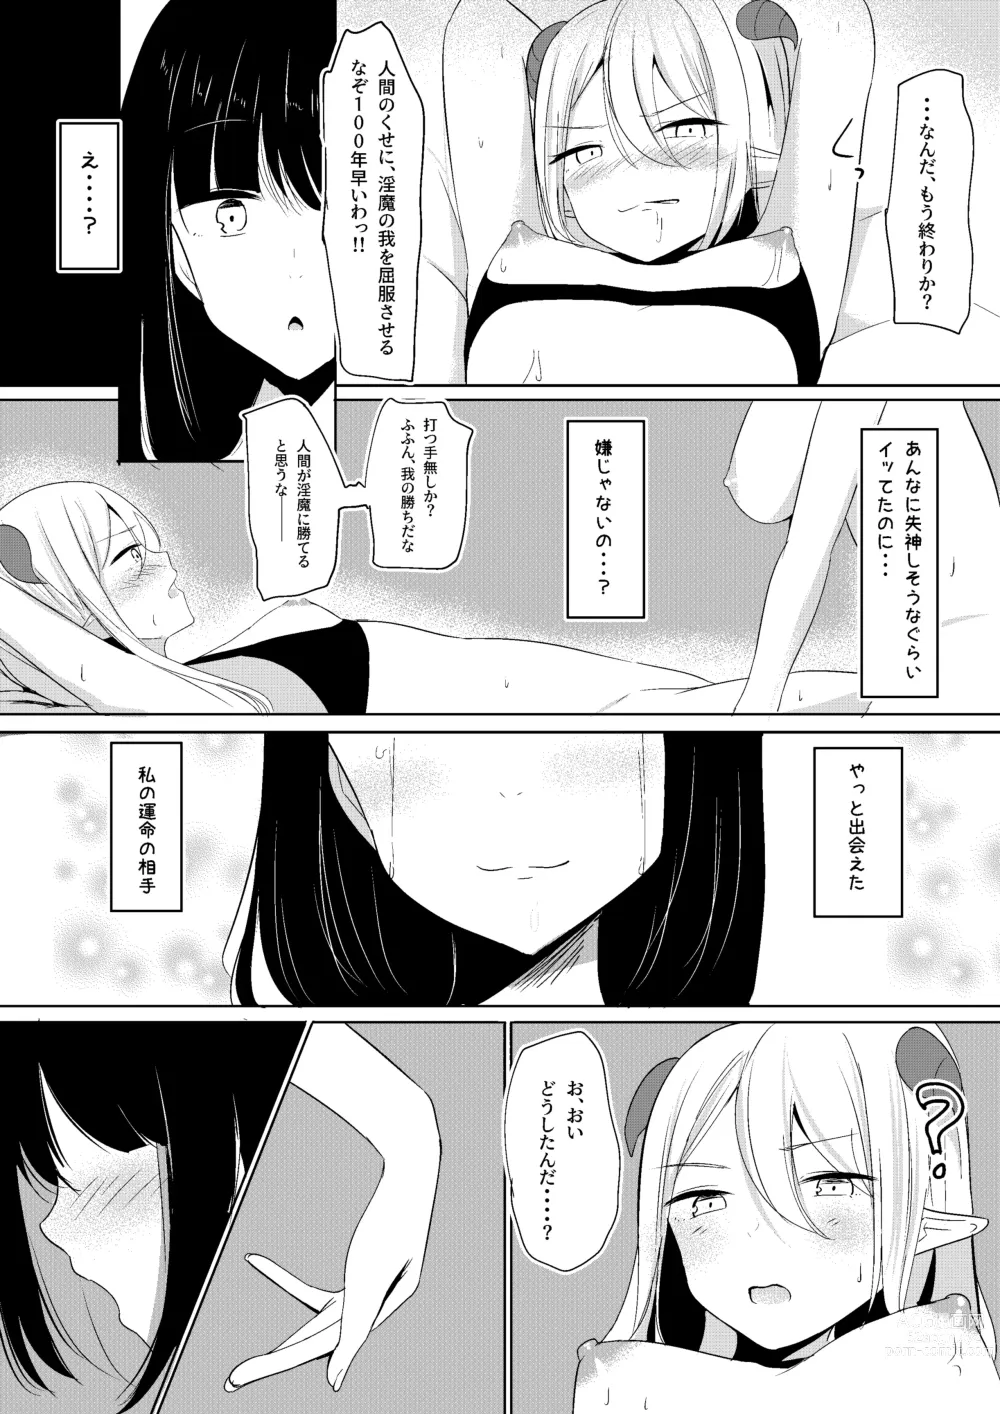 Page 22 of doujinshi Succubus Lily